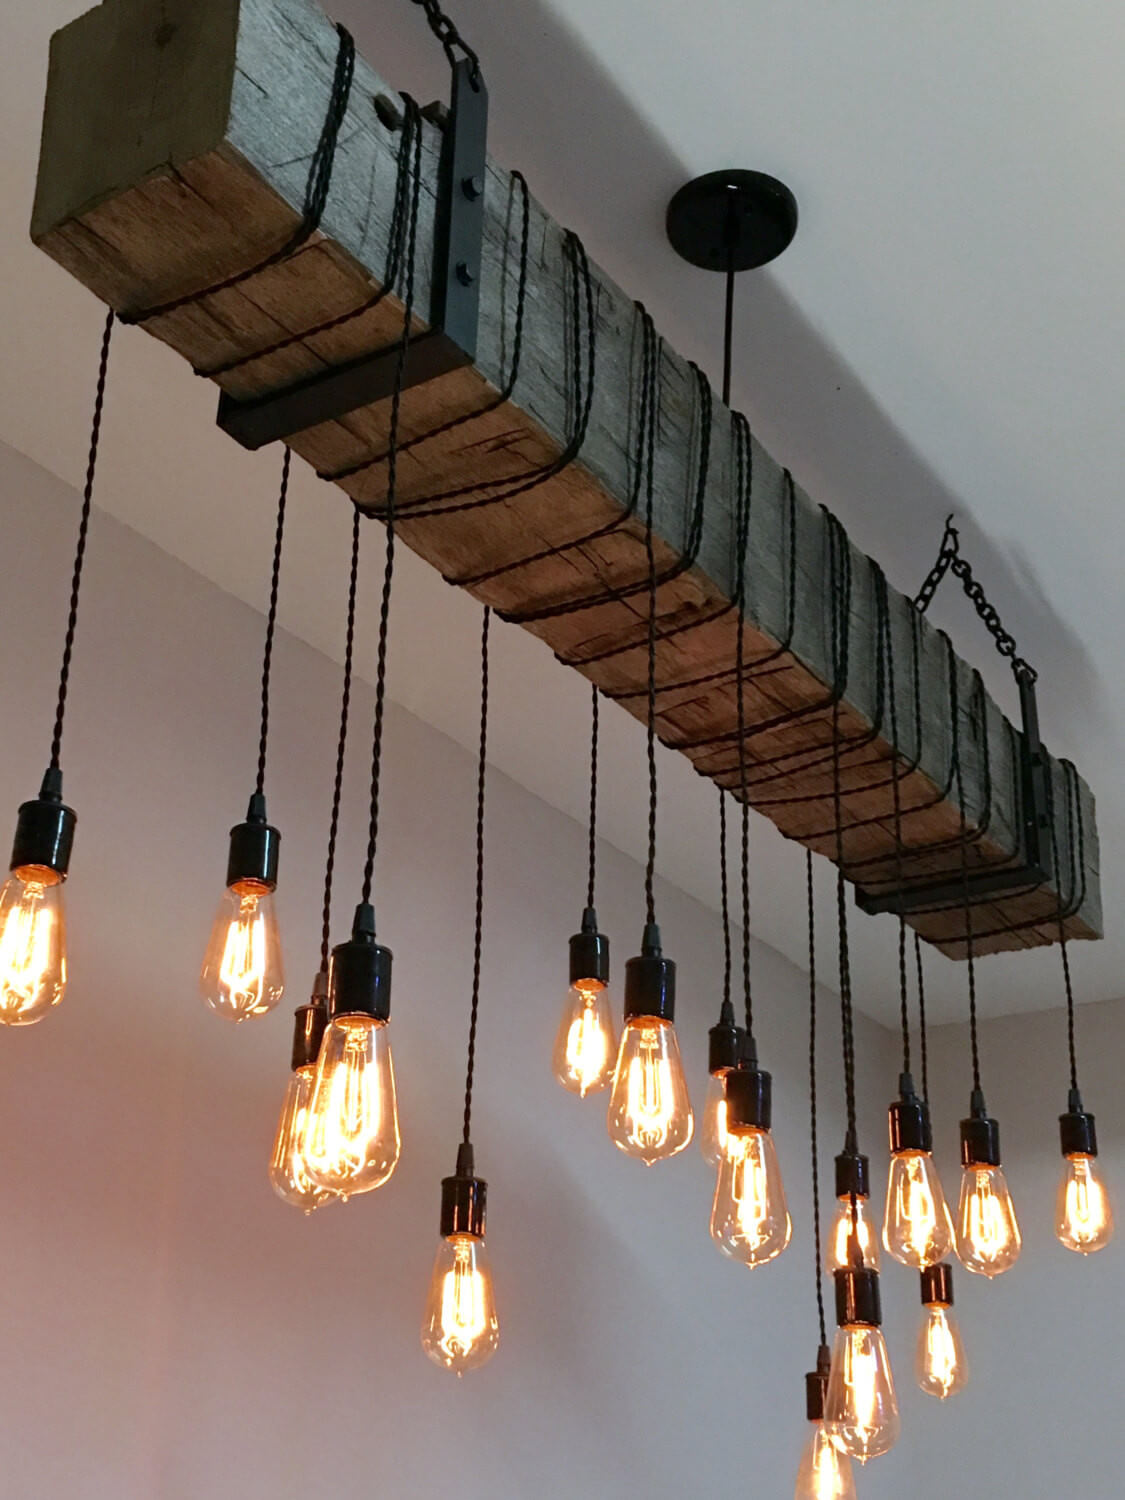 Light Fixture with Railroad Tie and Edison Lights